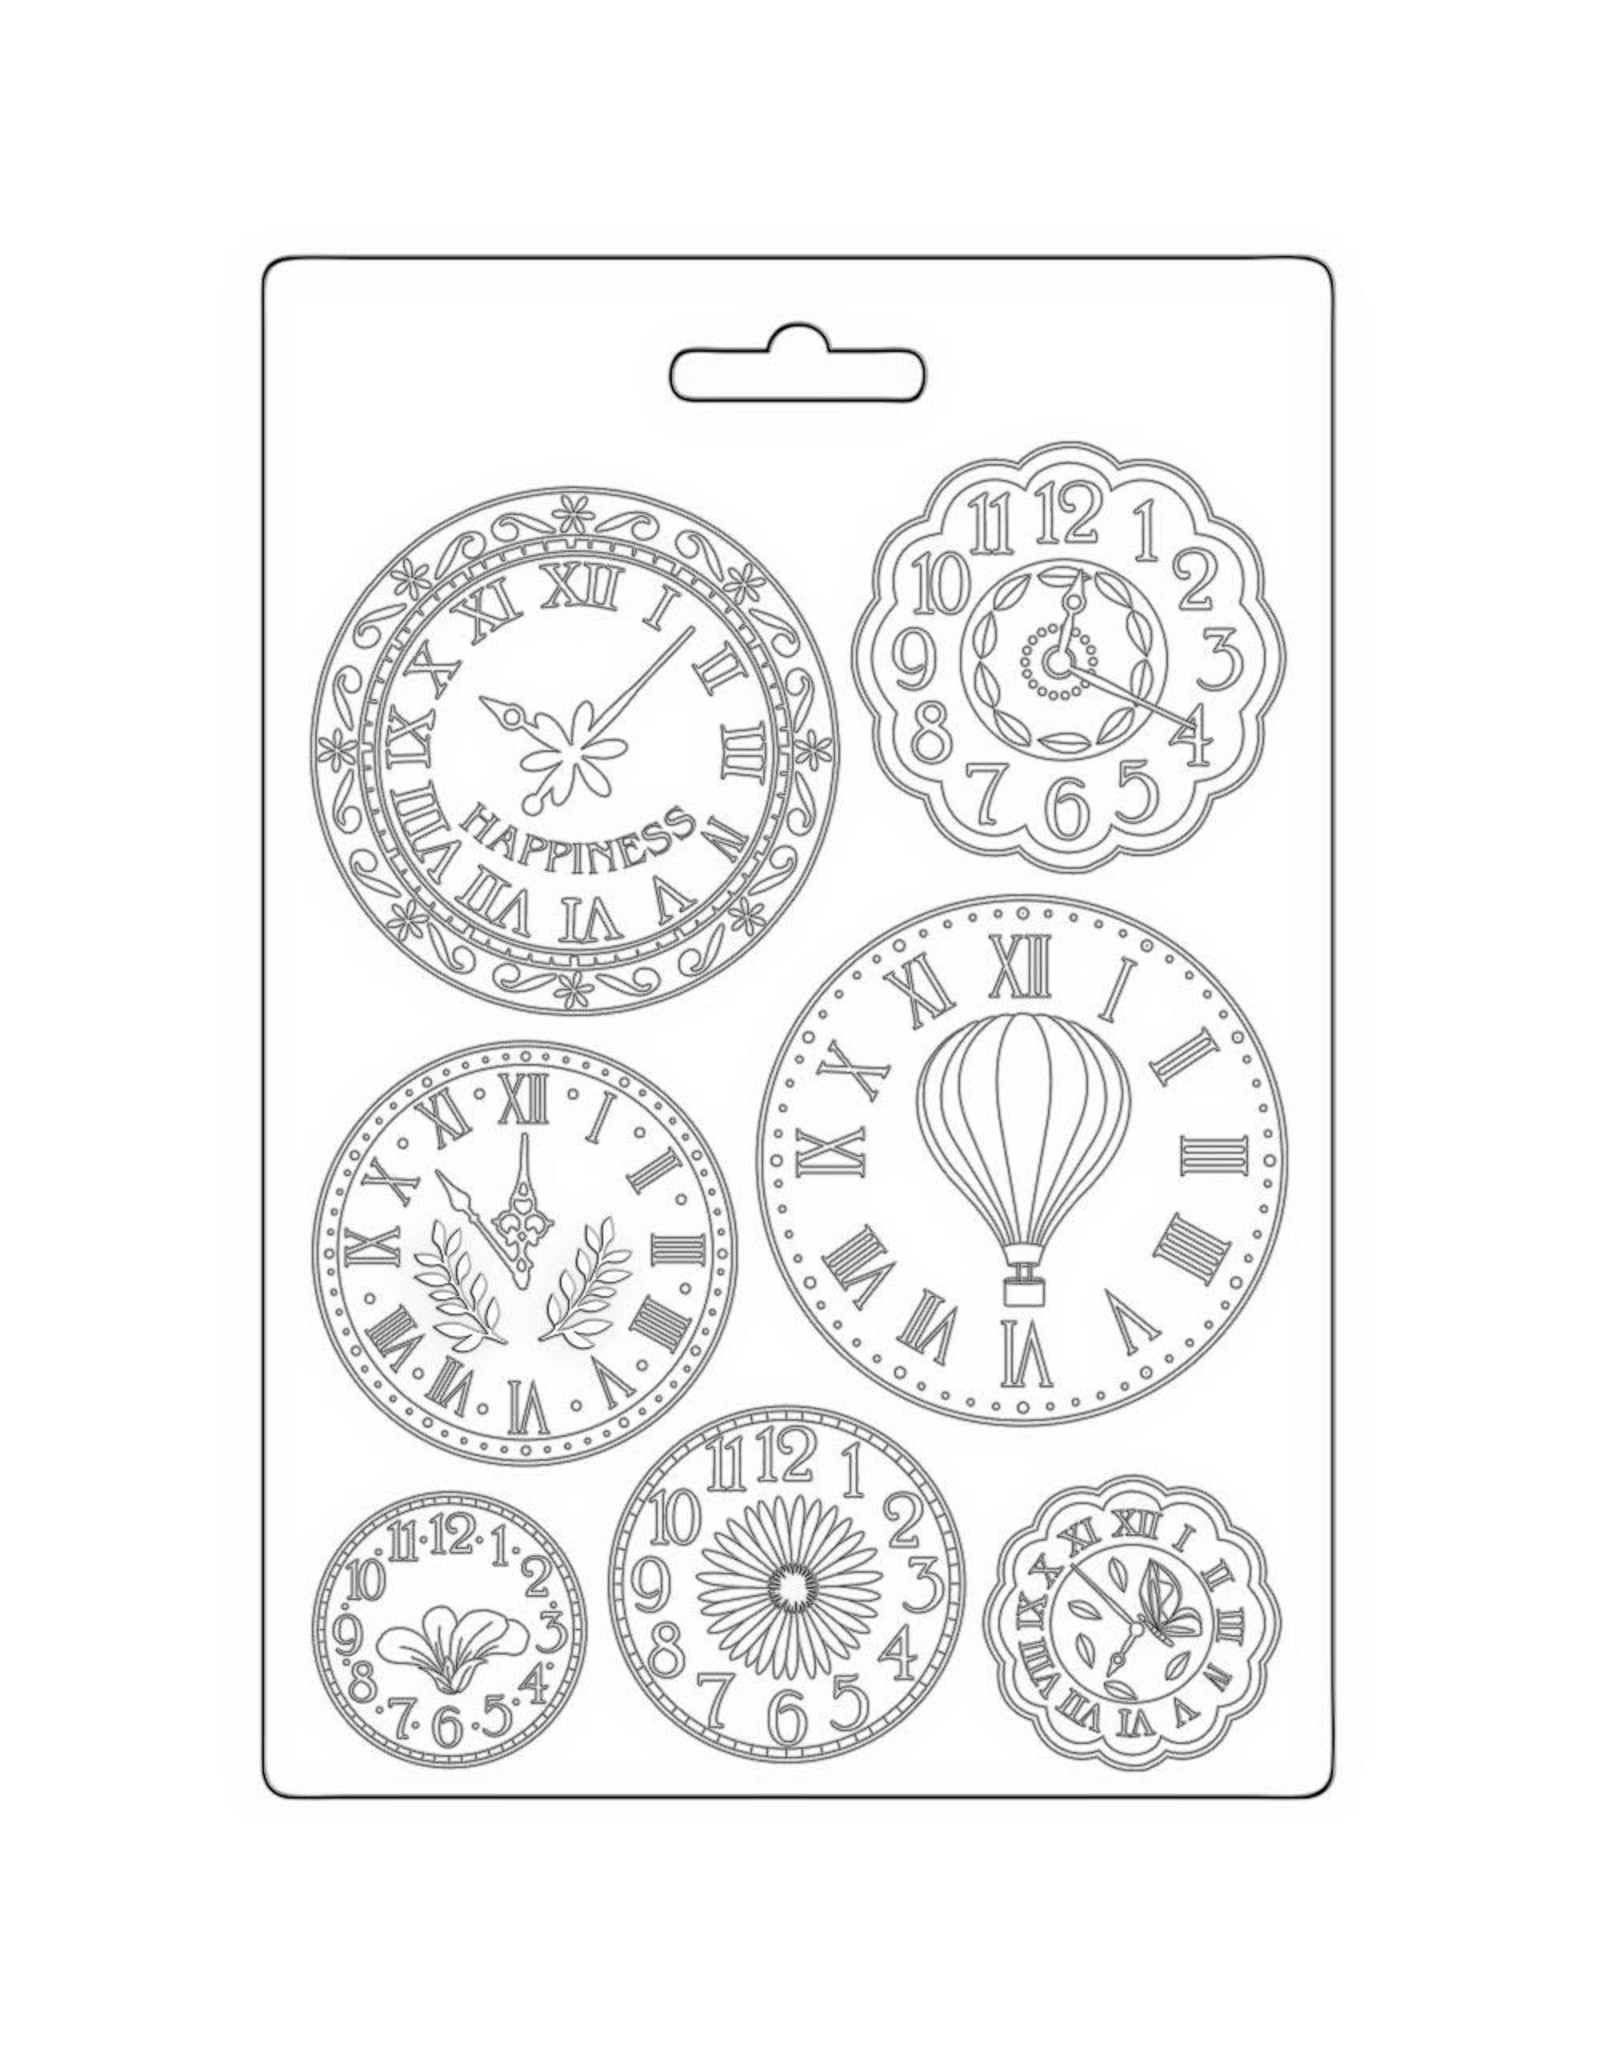 STAMPERIA STAMPERIA VICKY PAPAIOANNOU CREATE HAPPINESS WELCOME HOME CLOCKS A5 TEXTURE SOFT MAXI MOULD